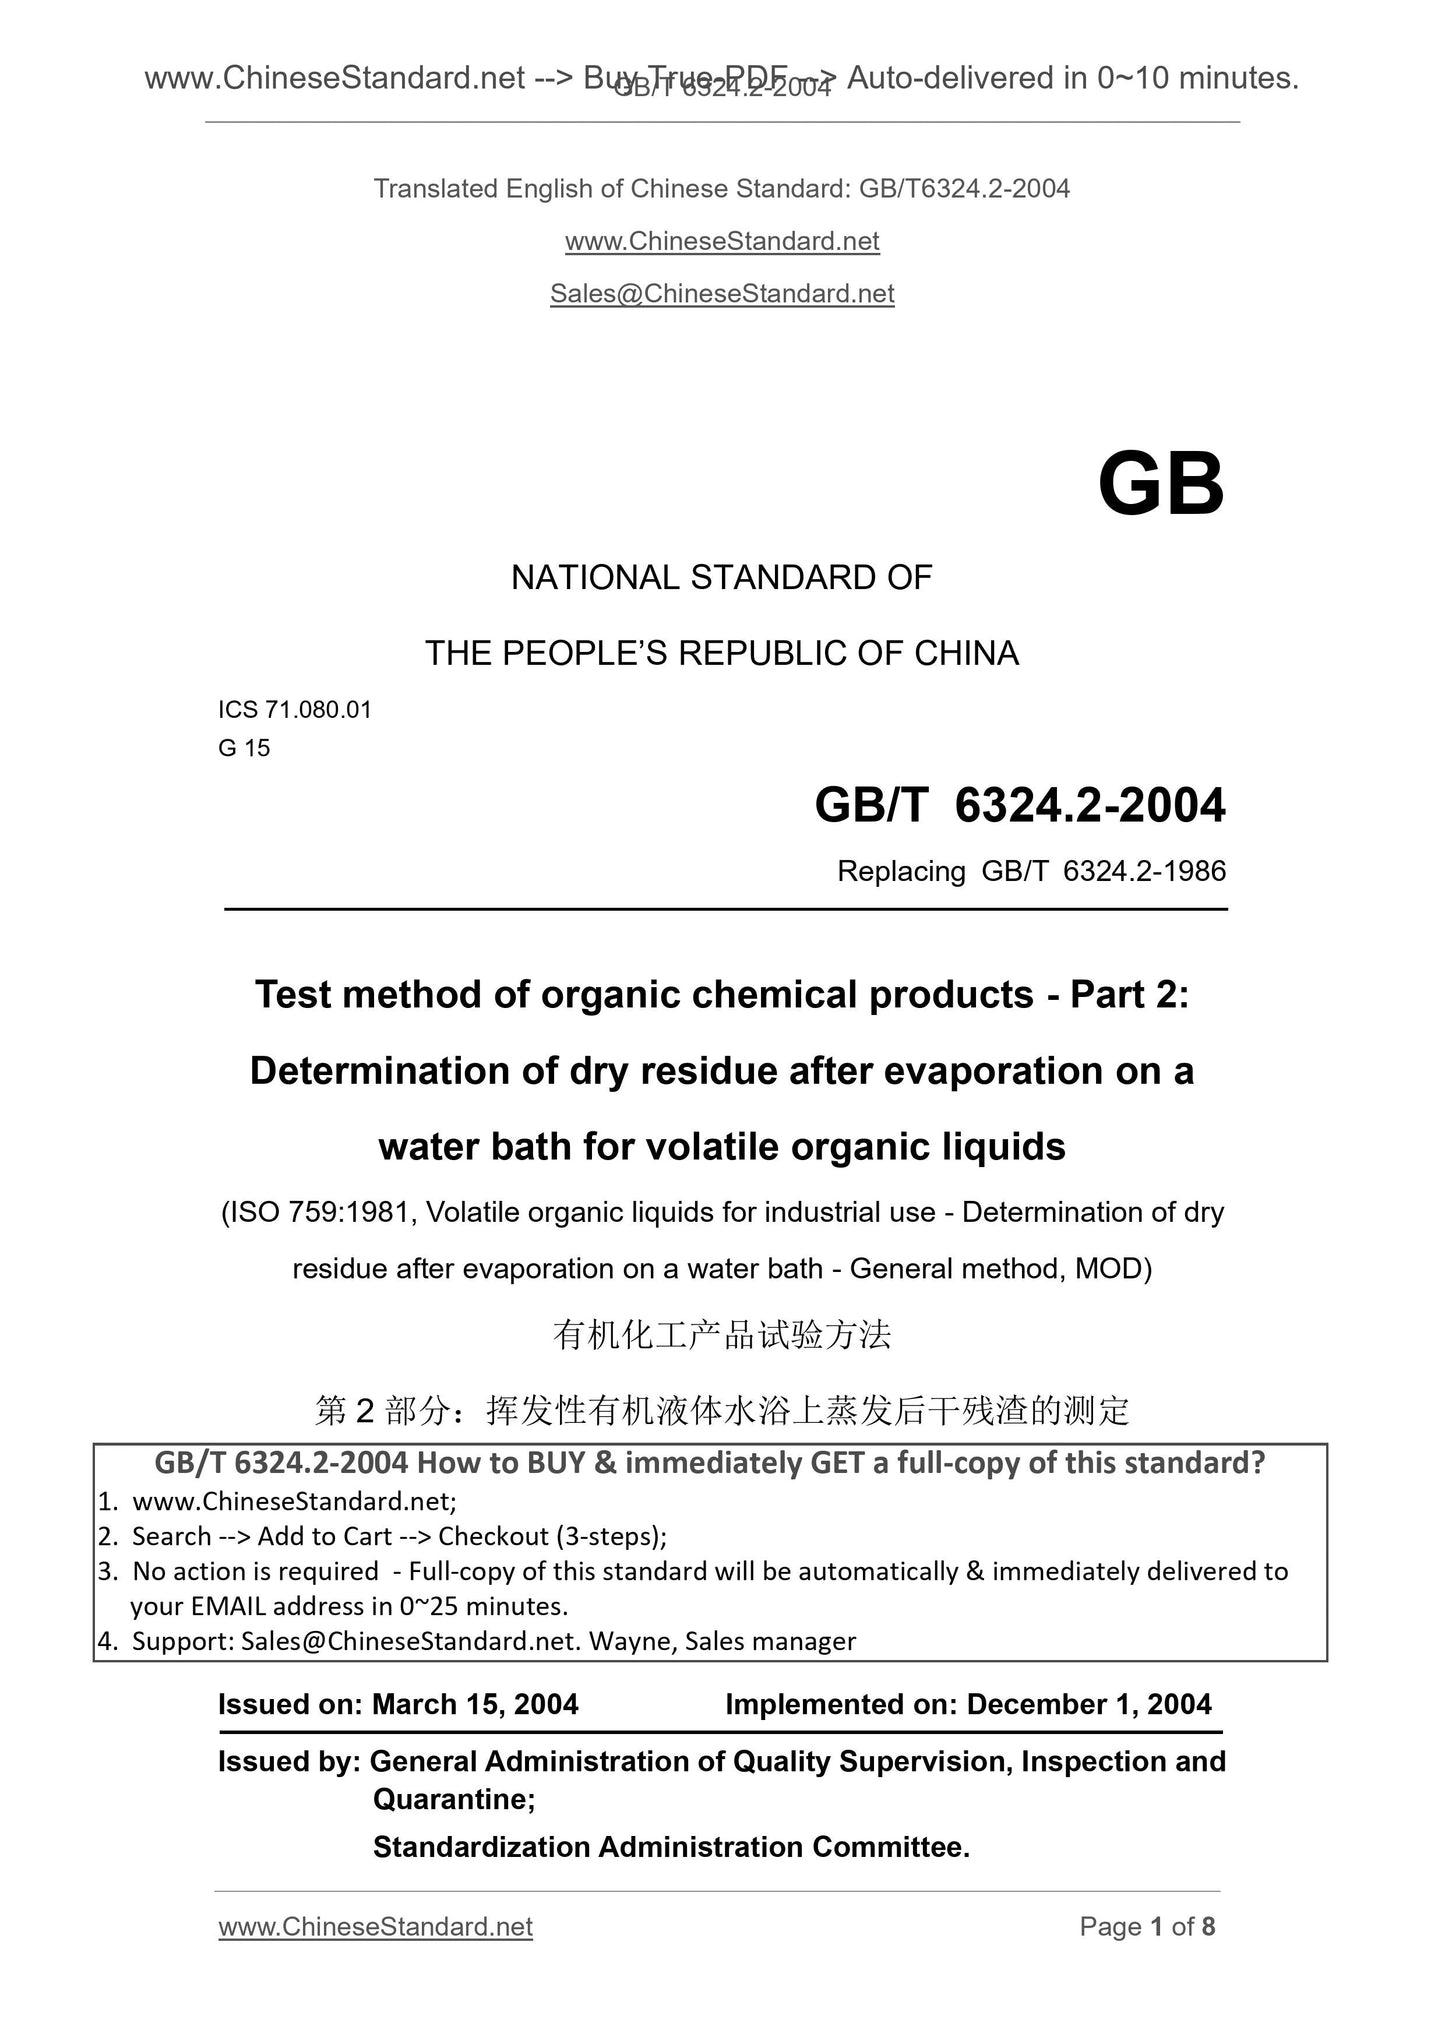 GB/T 6324.2-2004 Page 1